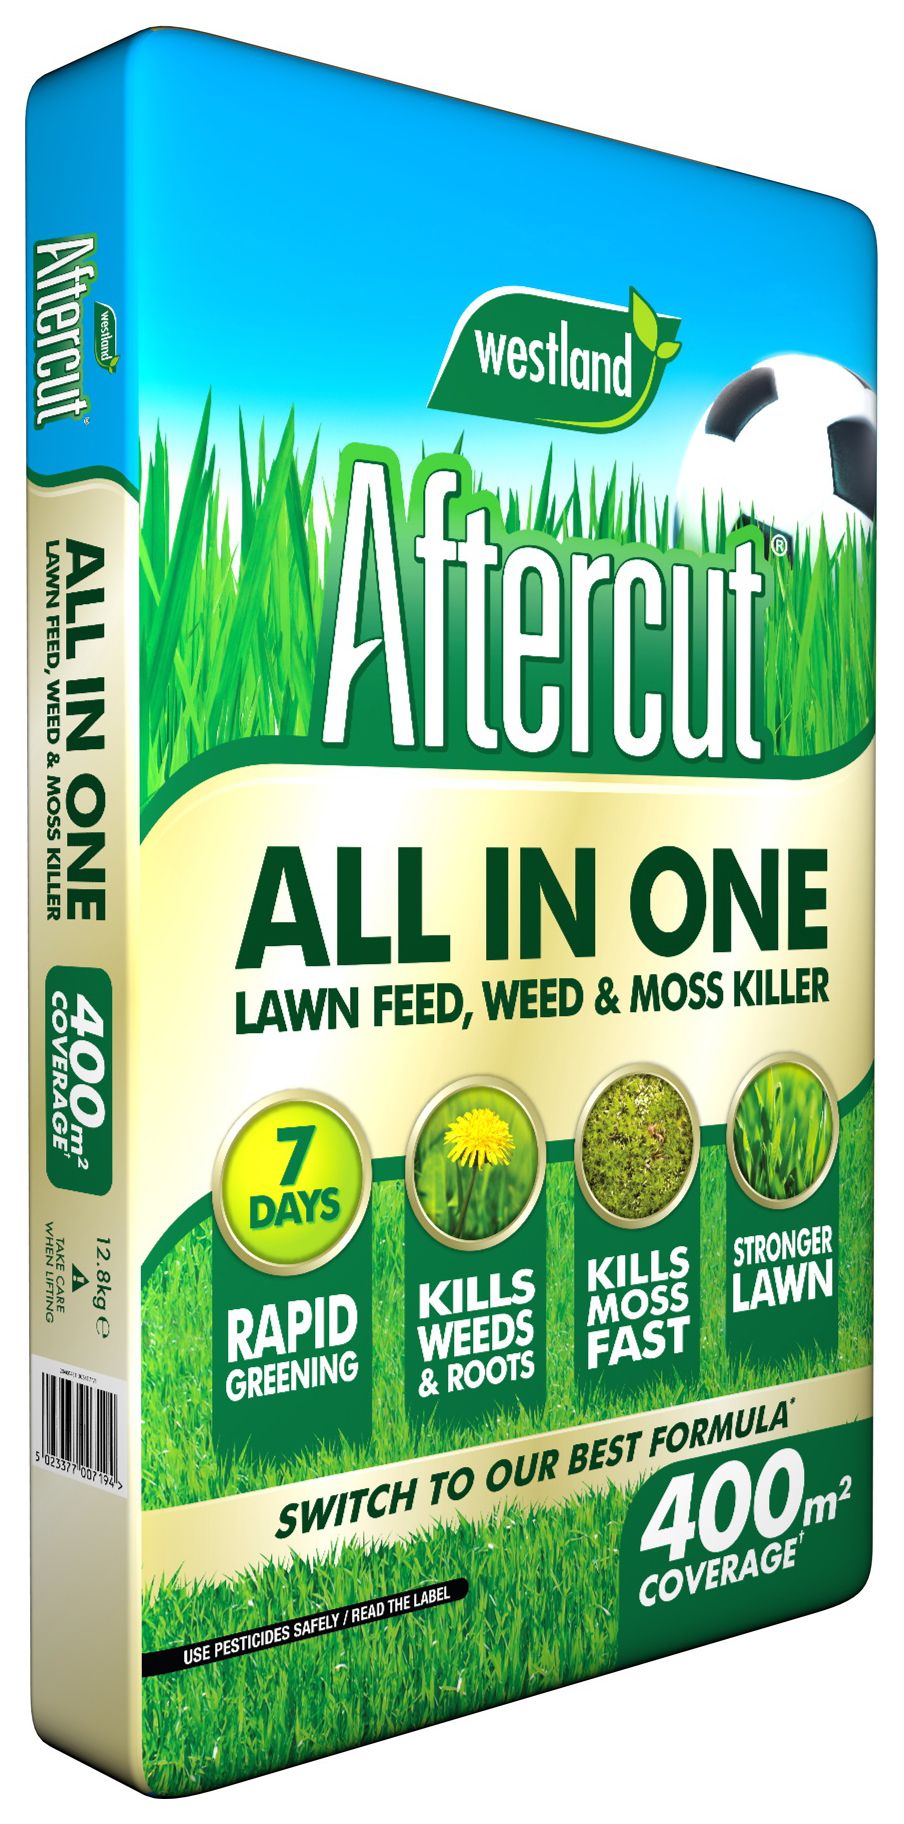 Westland Aftercut All In One Lawn Feed  Weed & Moss Killer - 400m²